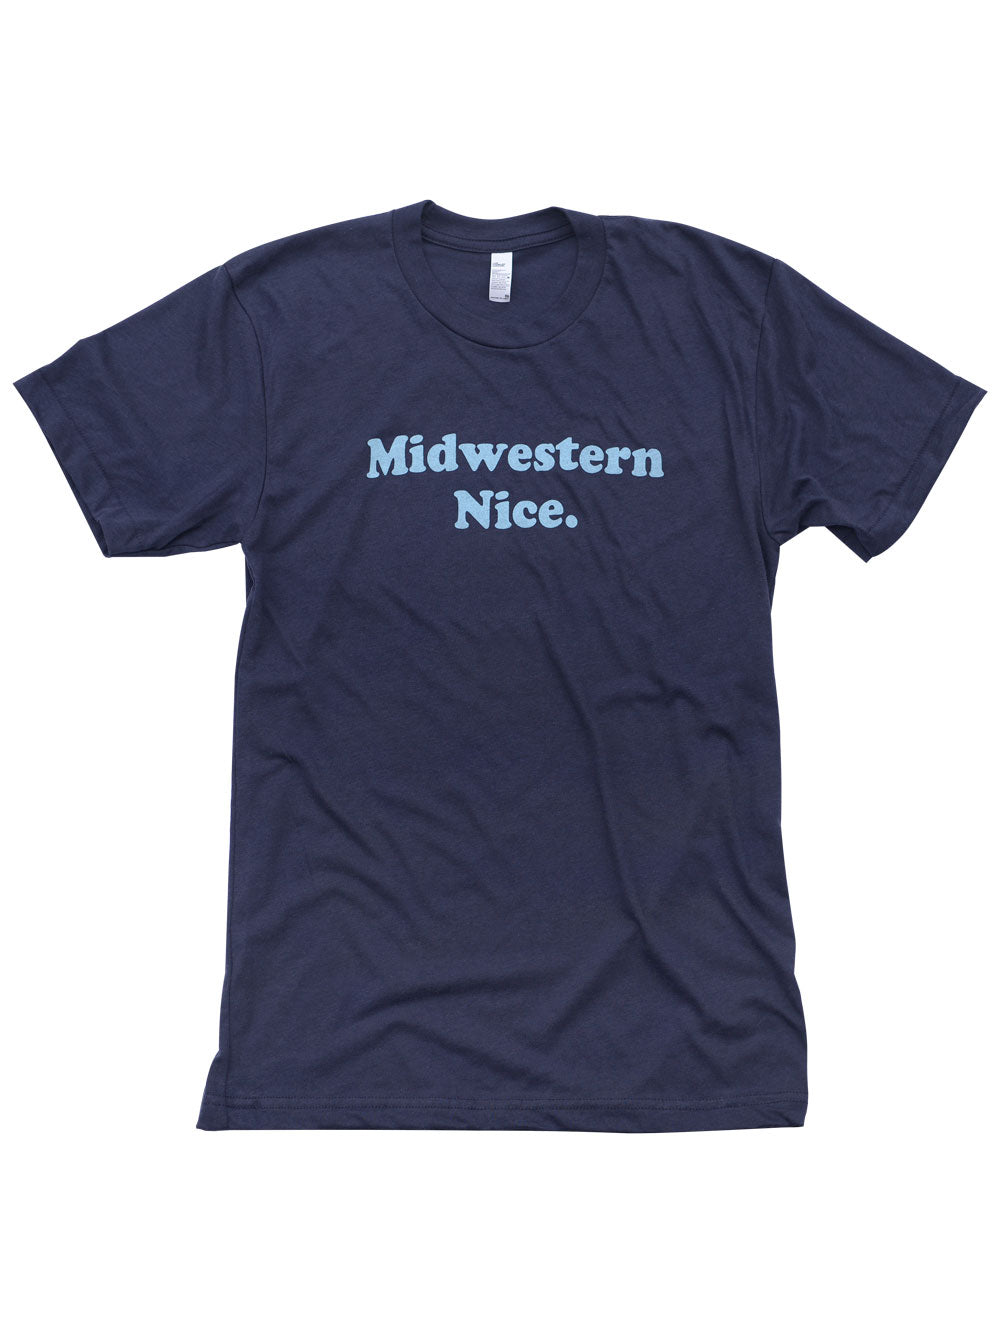 Midwestern Nice navy t-shirt